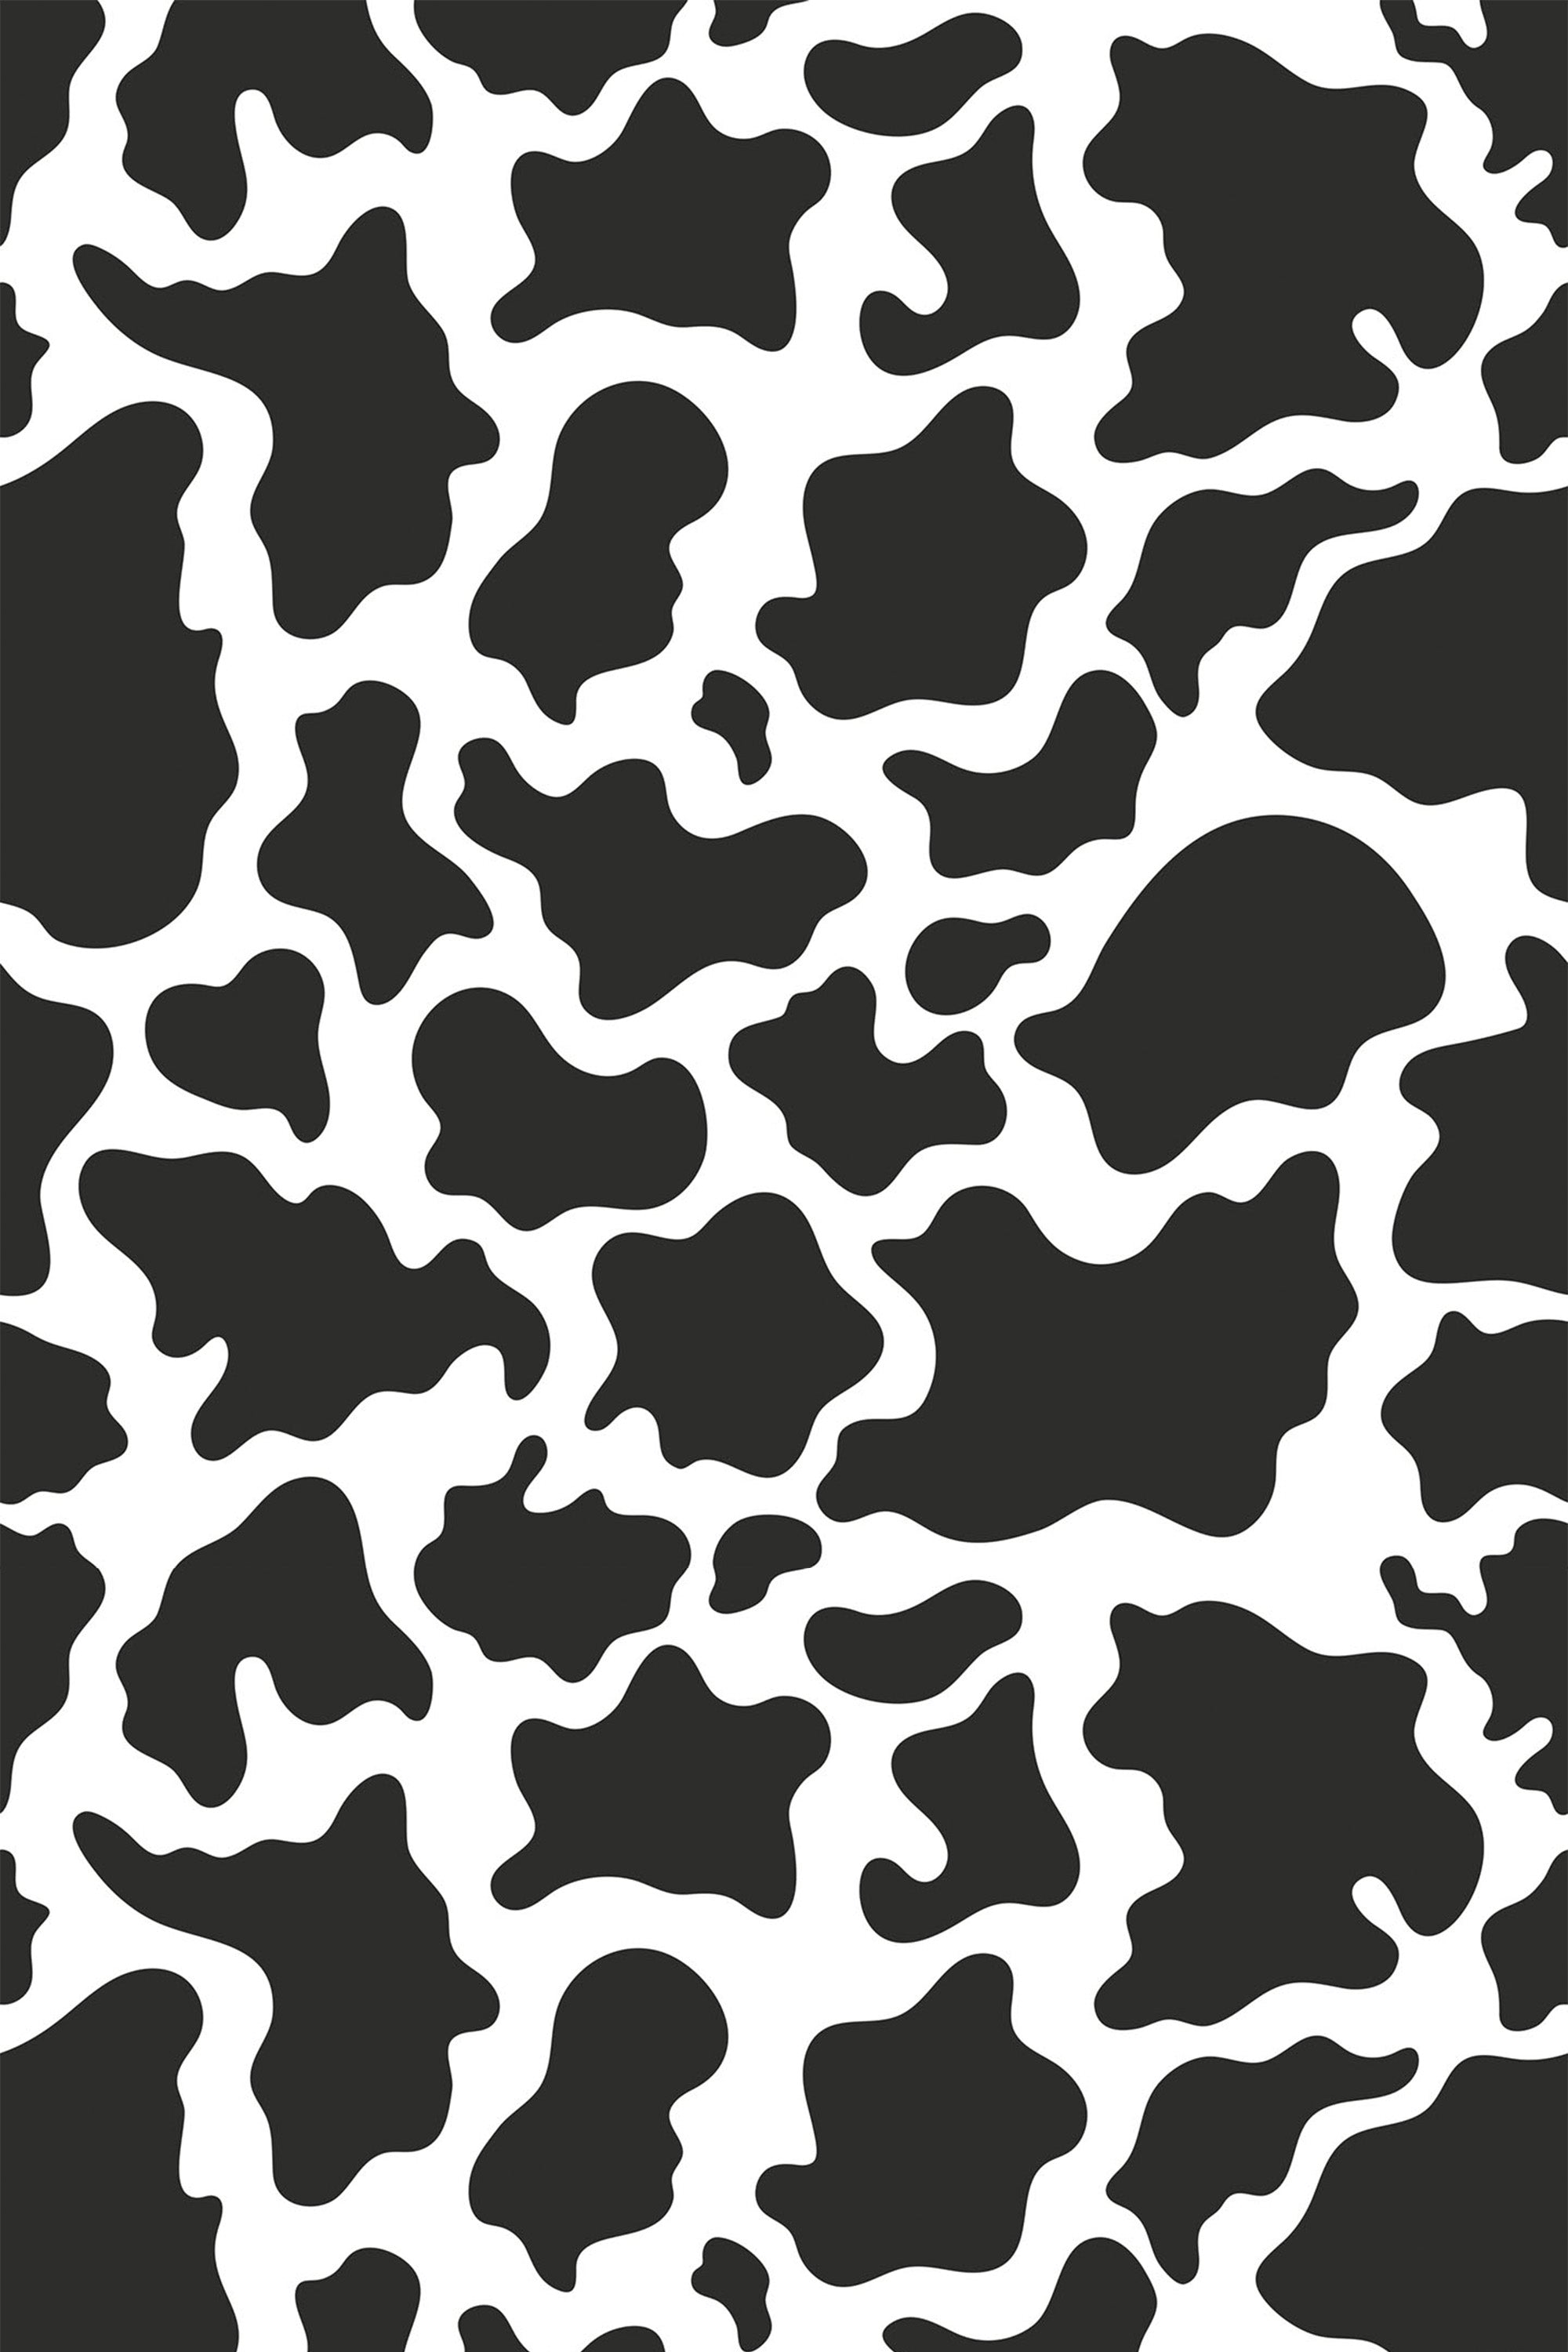 Cotton Cow Print Patterned Animal Print Skin Deep Fabric Print by Yard  D777.37 